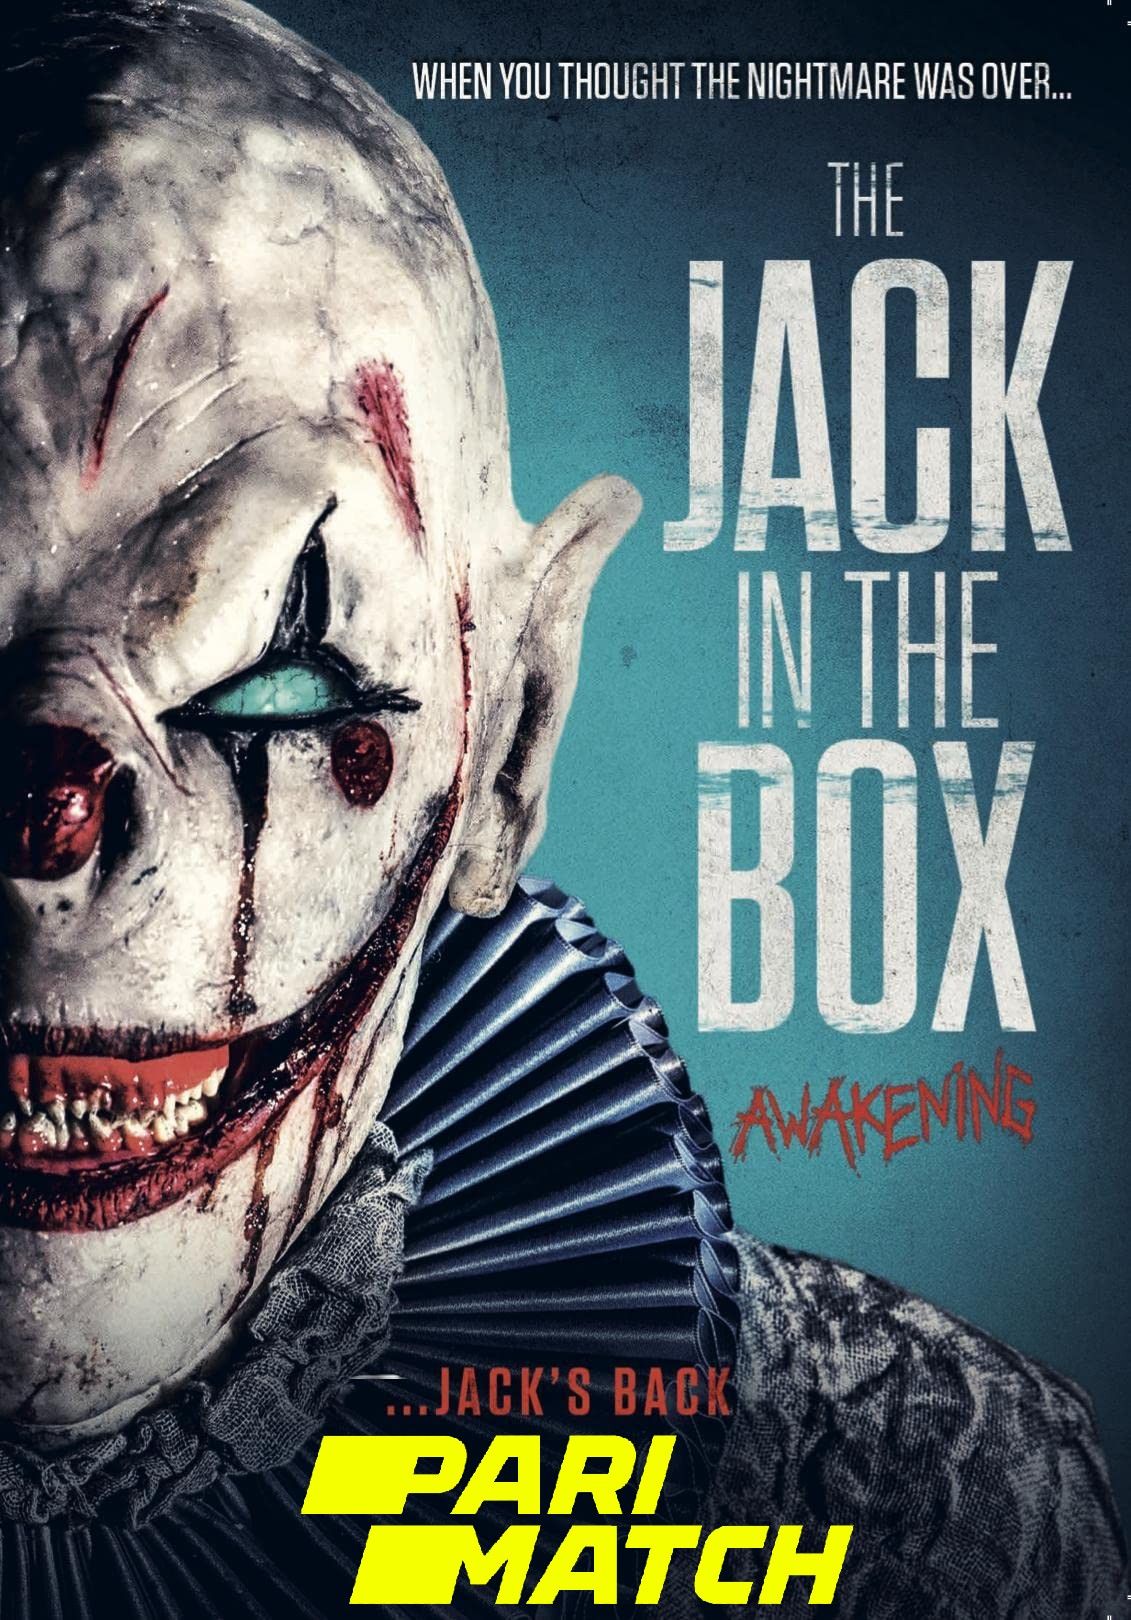 The Jack in the Box: Awakening (2022) Bengali (Voice Over) Dubbed BDRip download full movie